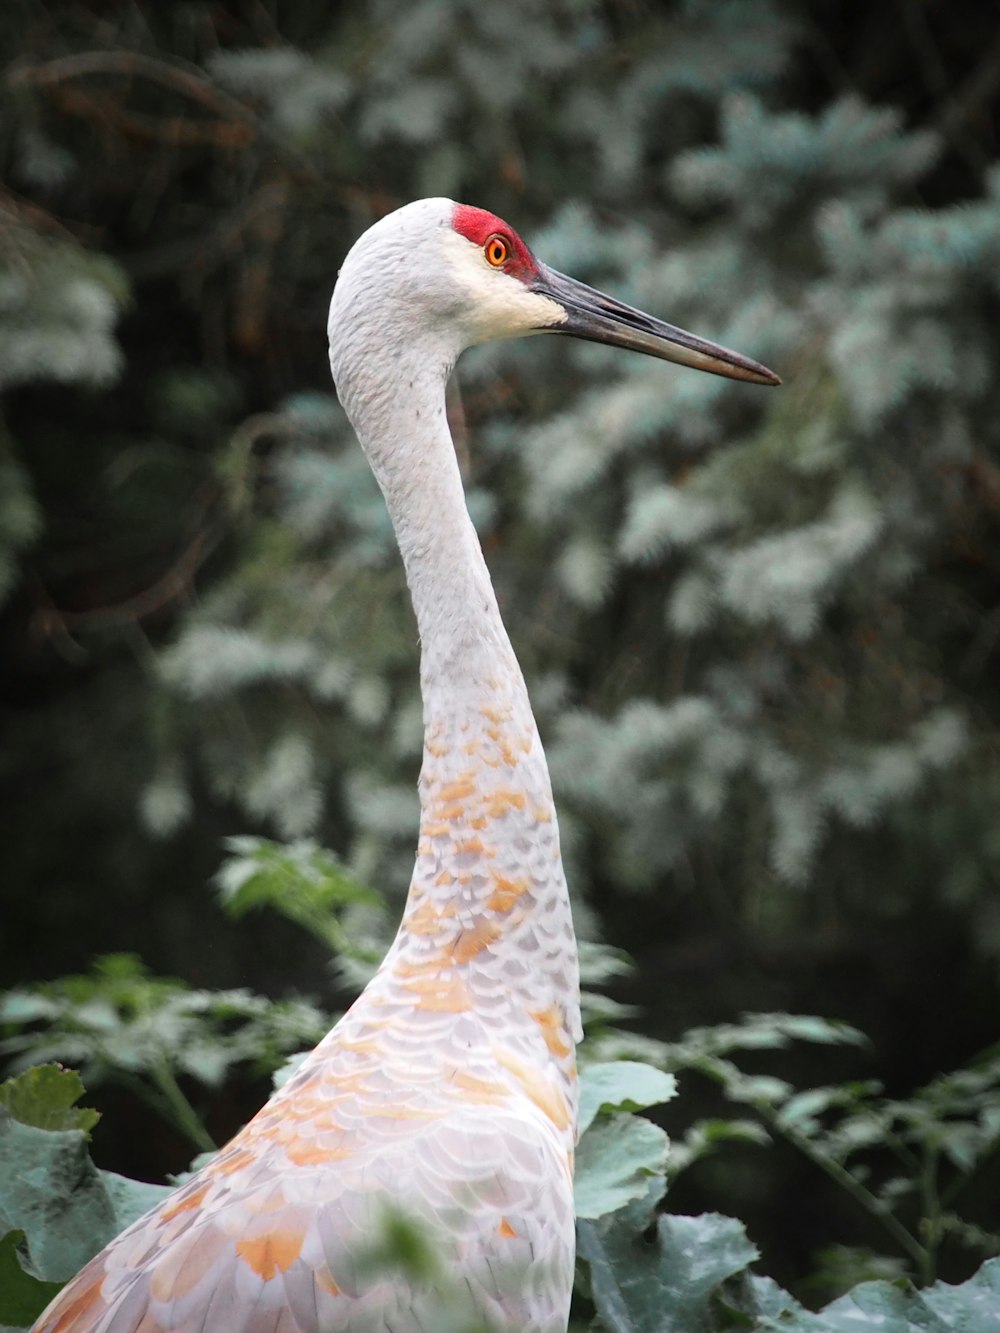 a large white bird standing in a forest